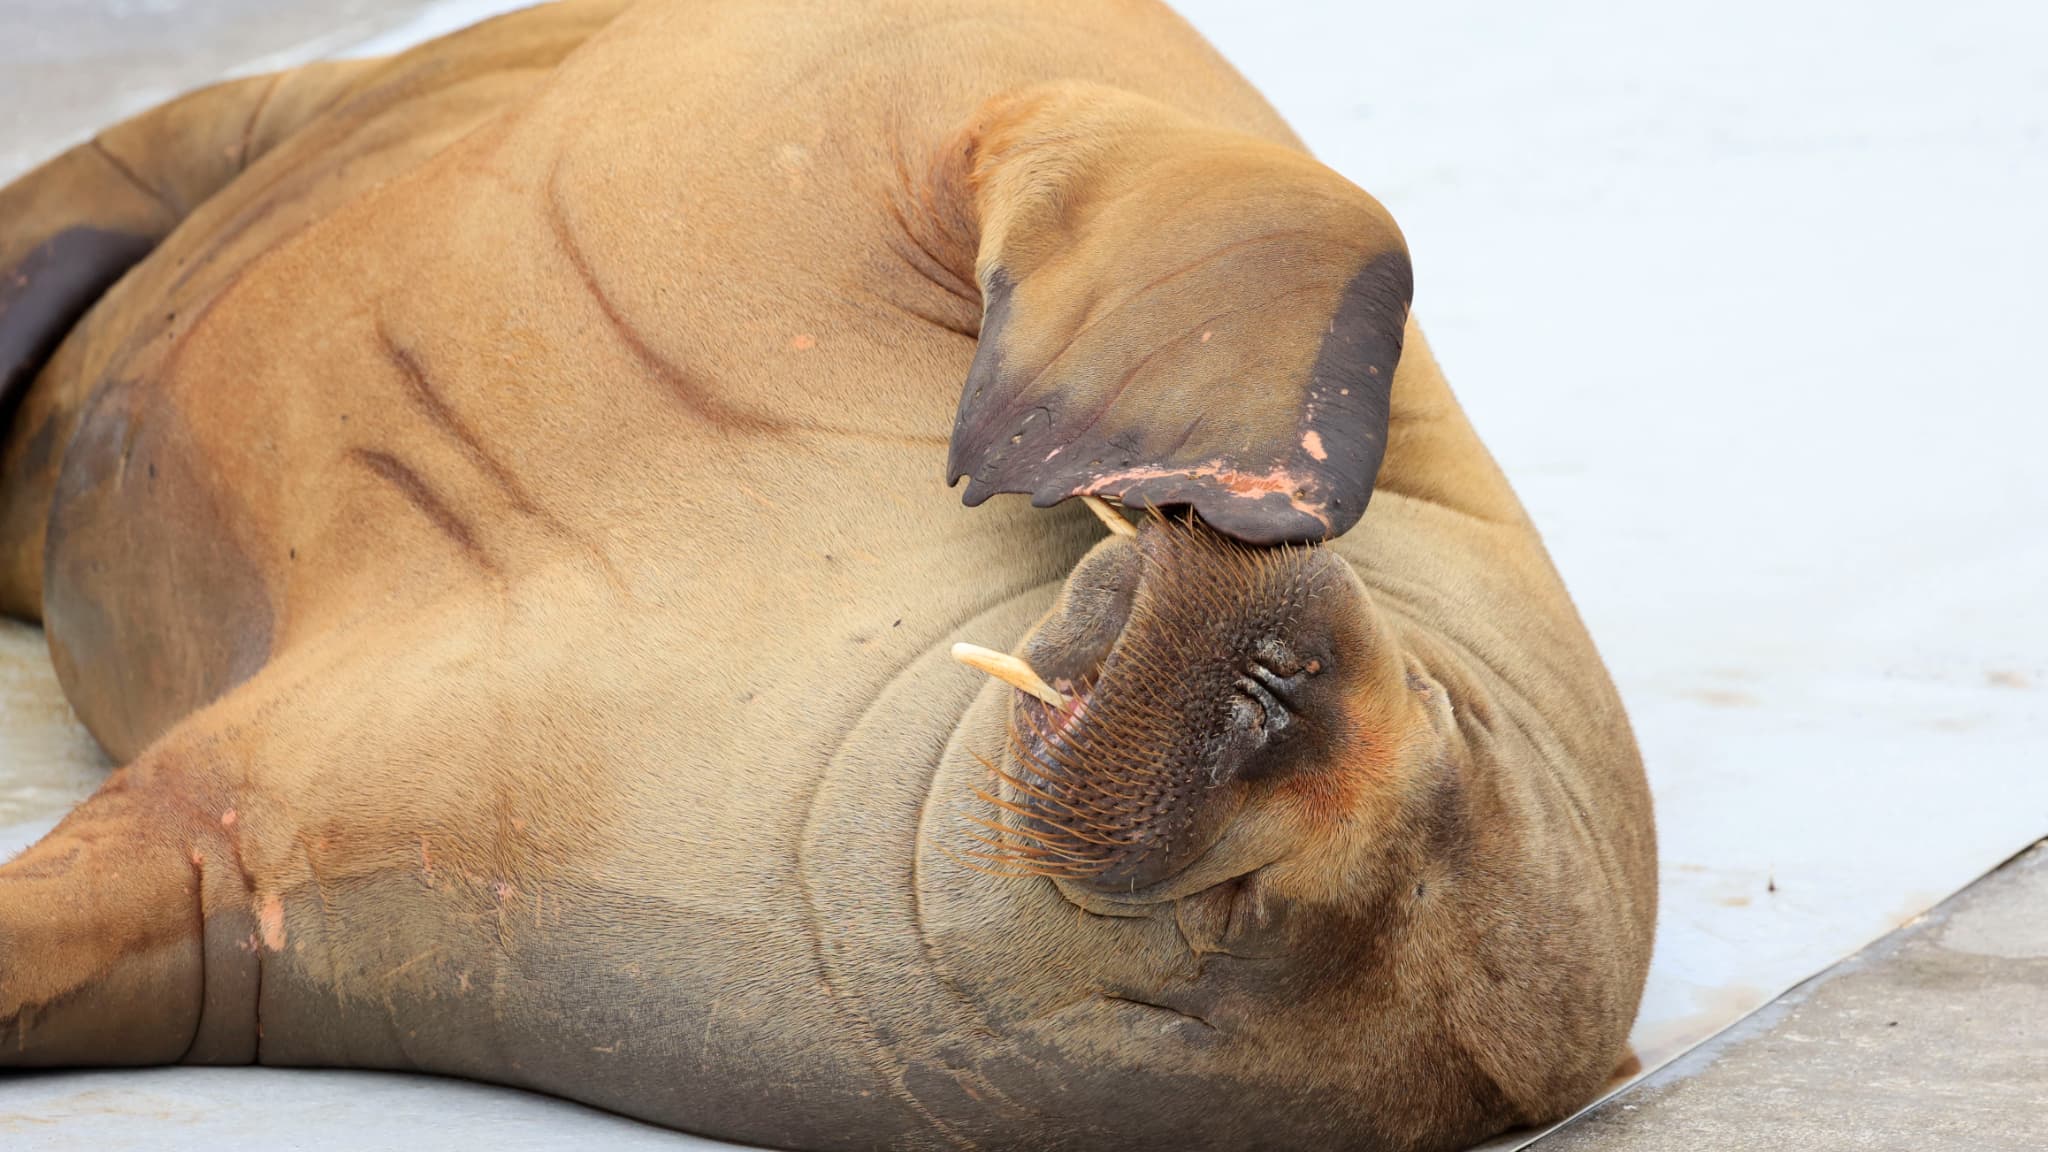 A walrus dies of bird flu in the Arctic – a first for this mammal species